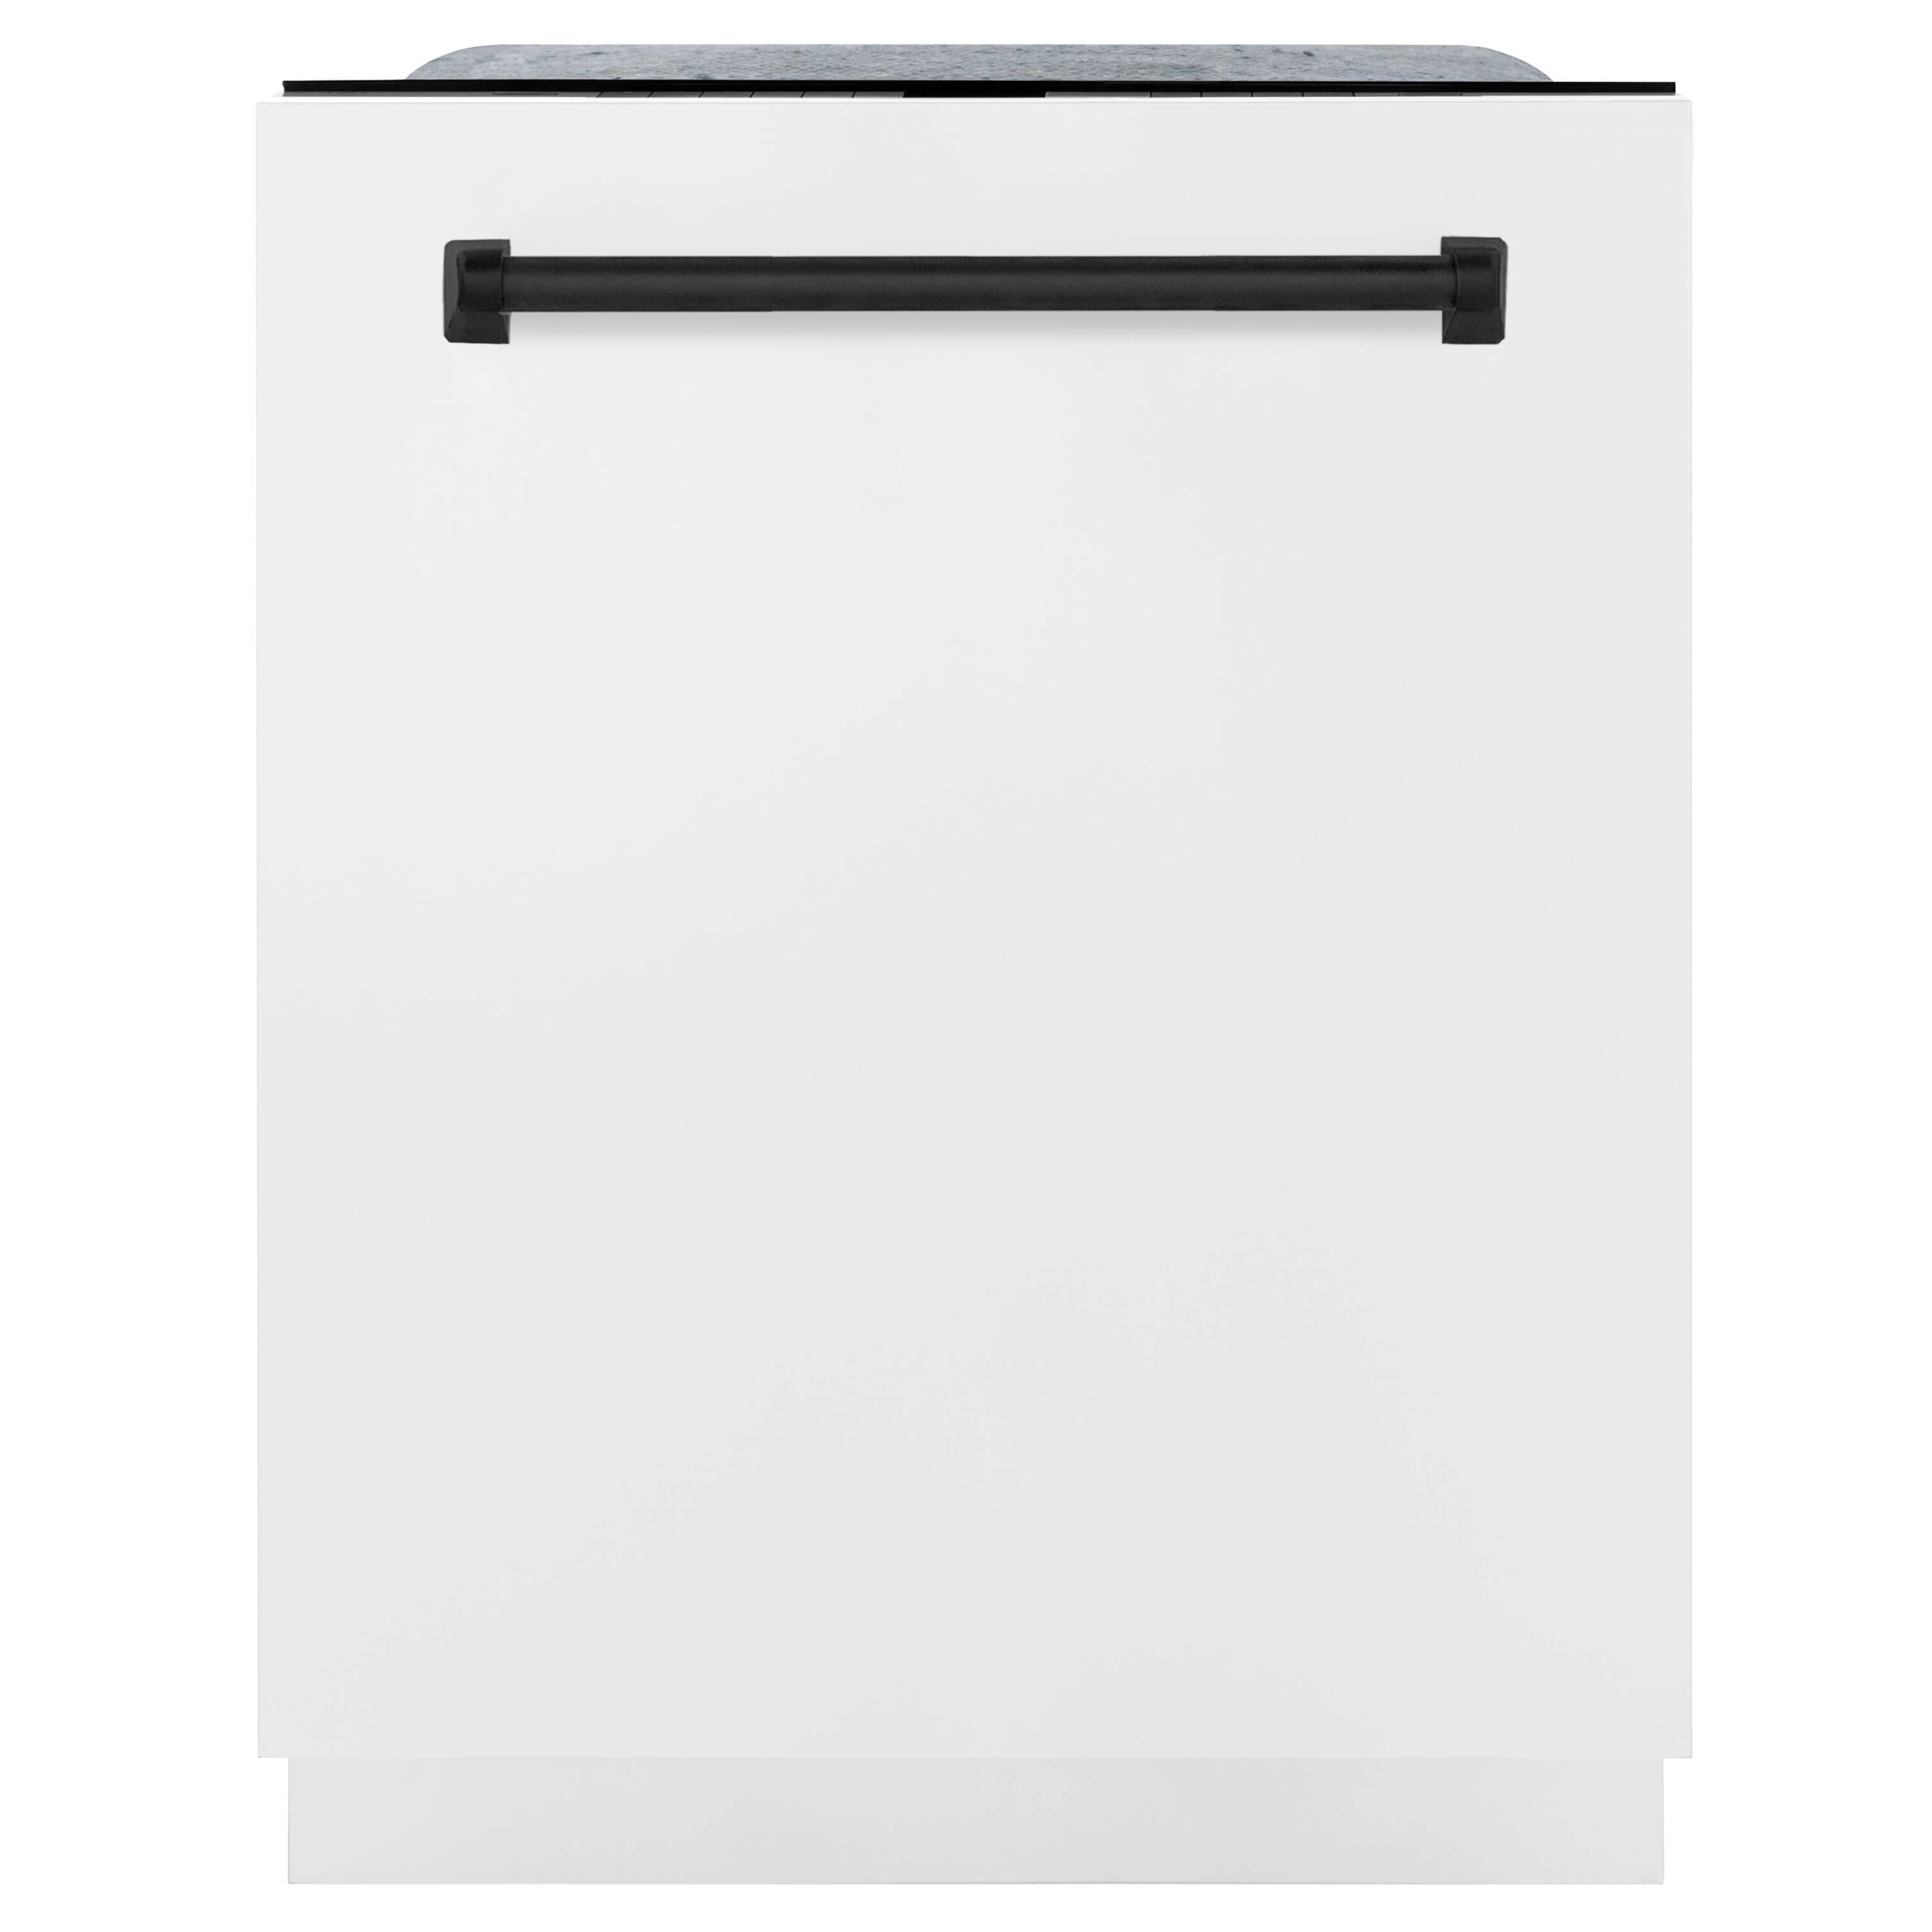 ZLINE Autograph Edition 24 in. 3rd Rack Top Touch Control Tall Tub Dishwasher in White Matte with Matte Black Accent Handle (DWMTZ-WM-24-MB)